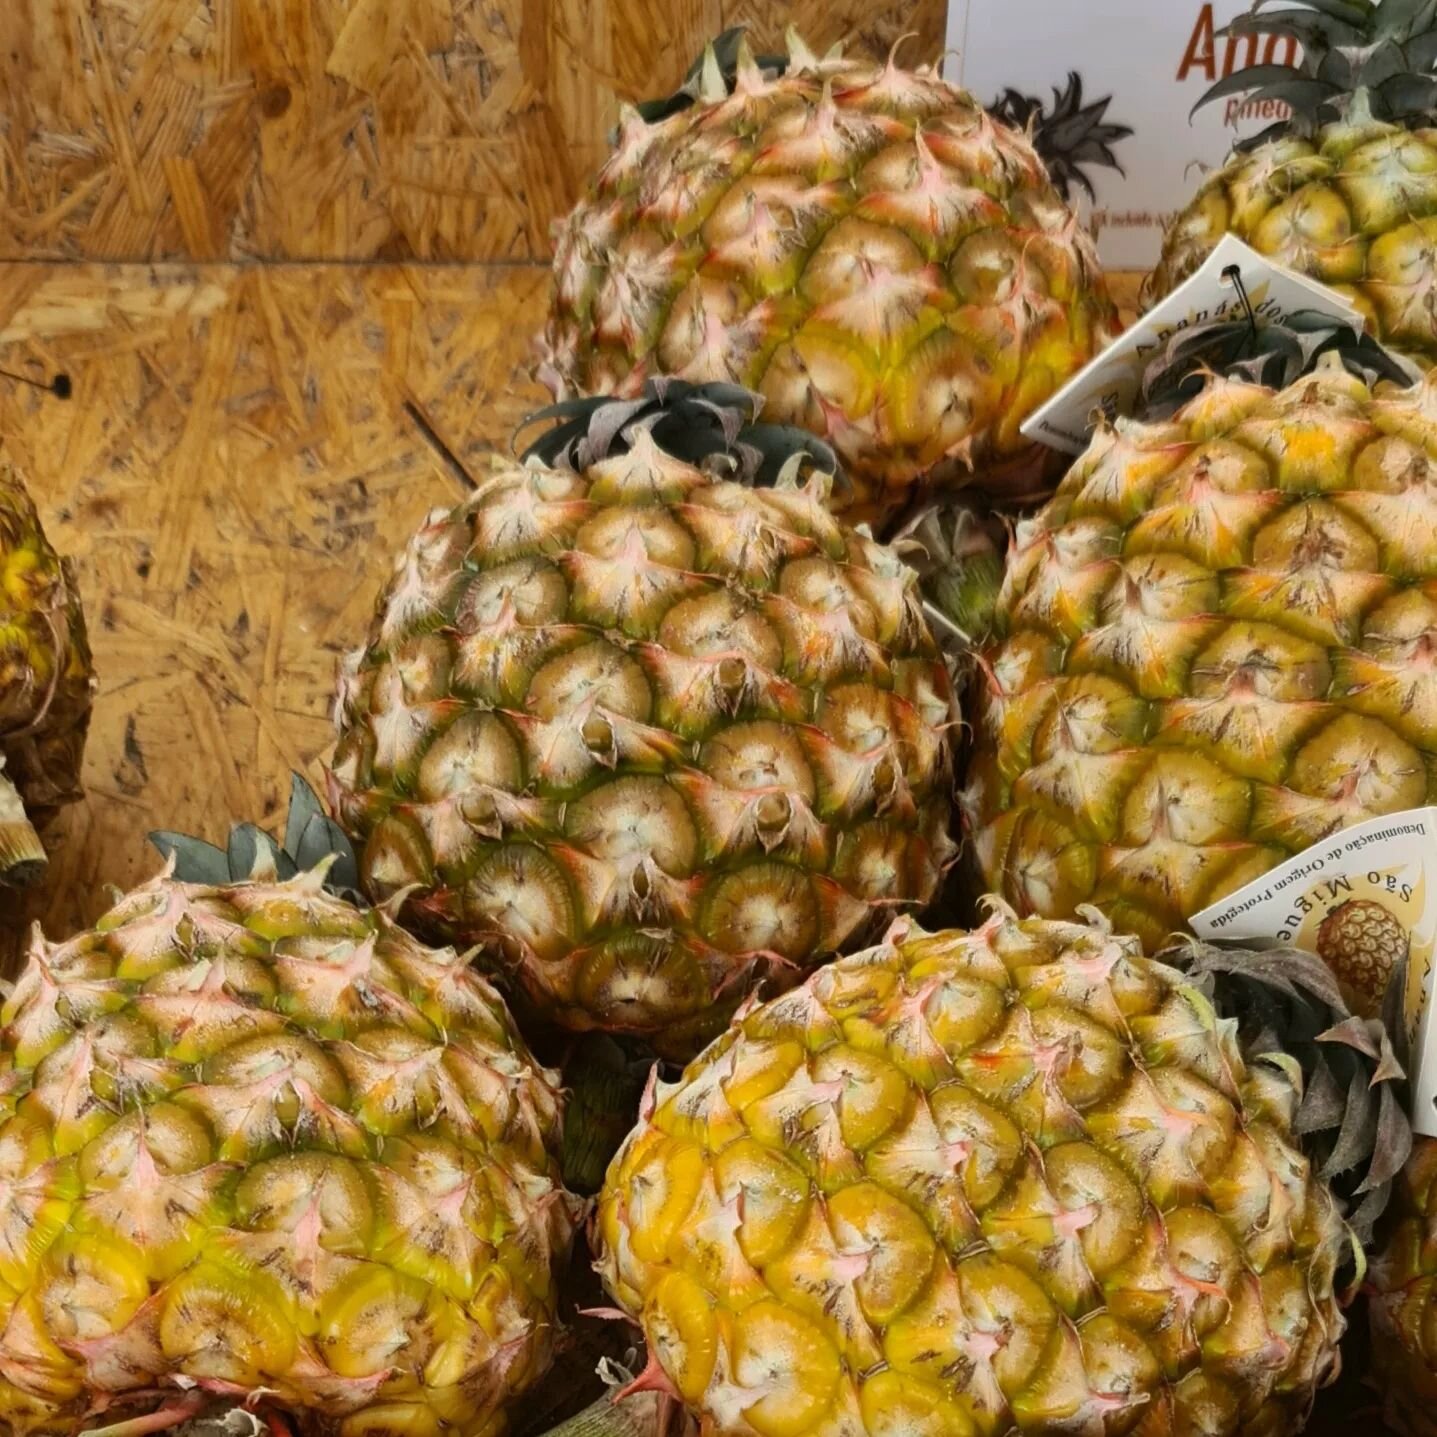 2 years from planting to harvest; the Azorean pineapple (Ananas) is ready for your table!

#pineapple #ananas #azores #fruitlover #fruits #fruitbowl #pineapplejuice #juicing #gottaloveit #azoresconnections #azoresvacations